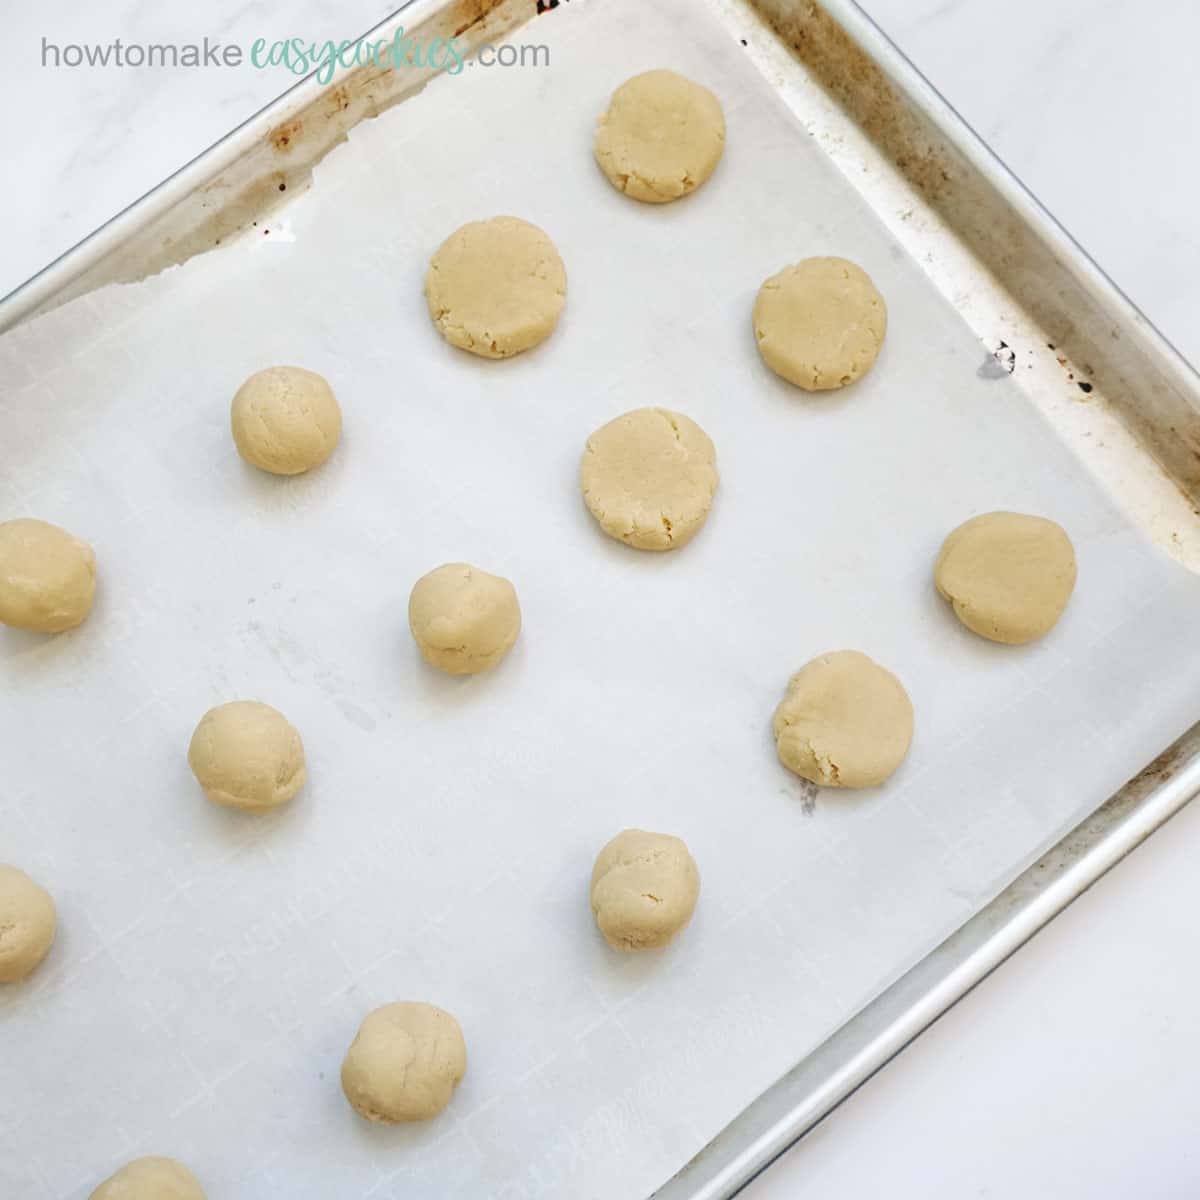 balls of cookie dough on baking tray